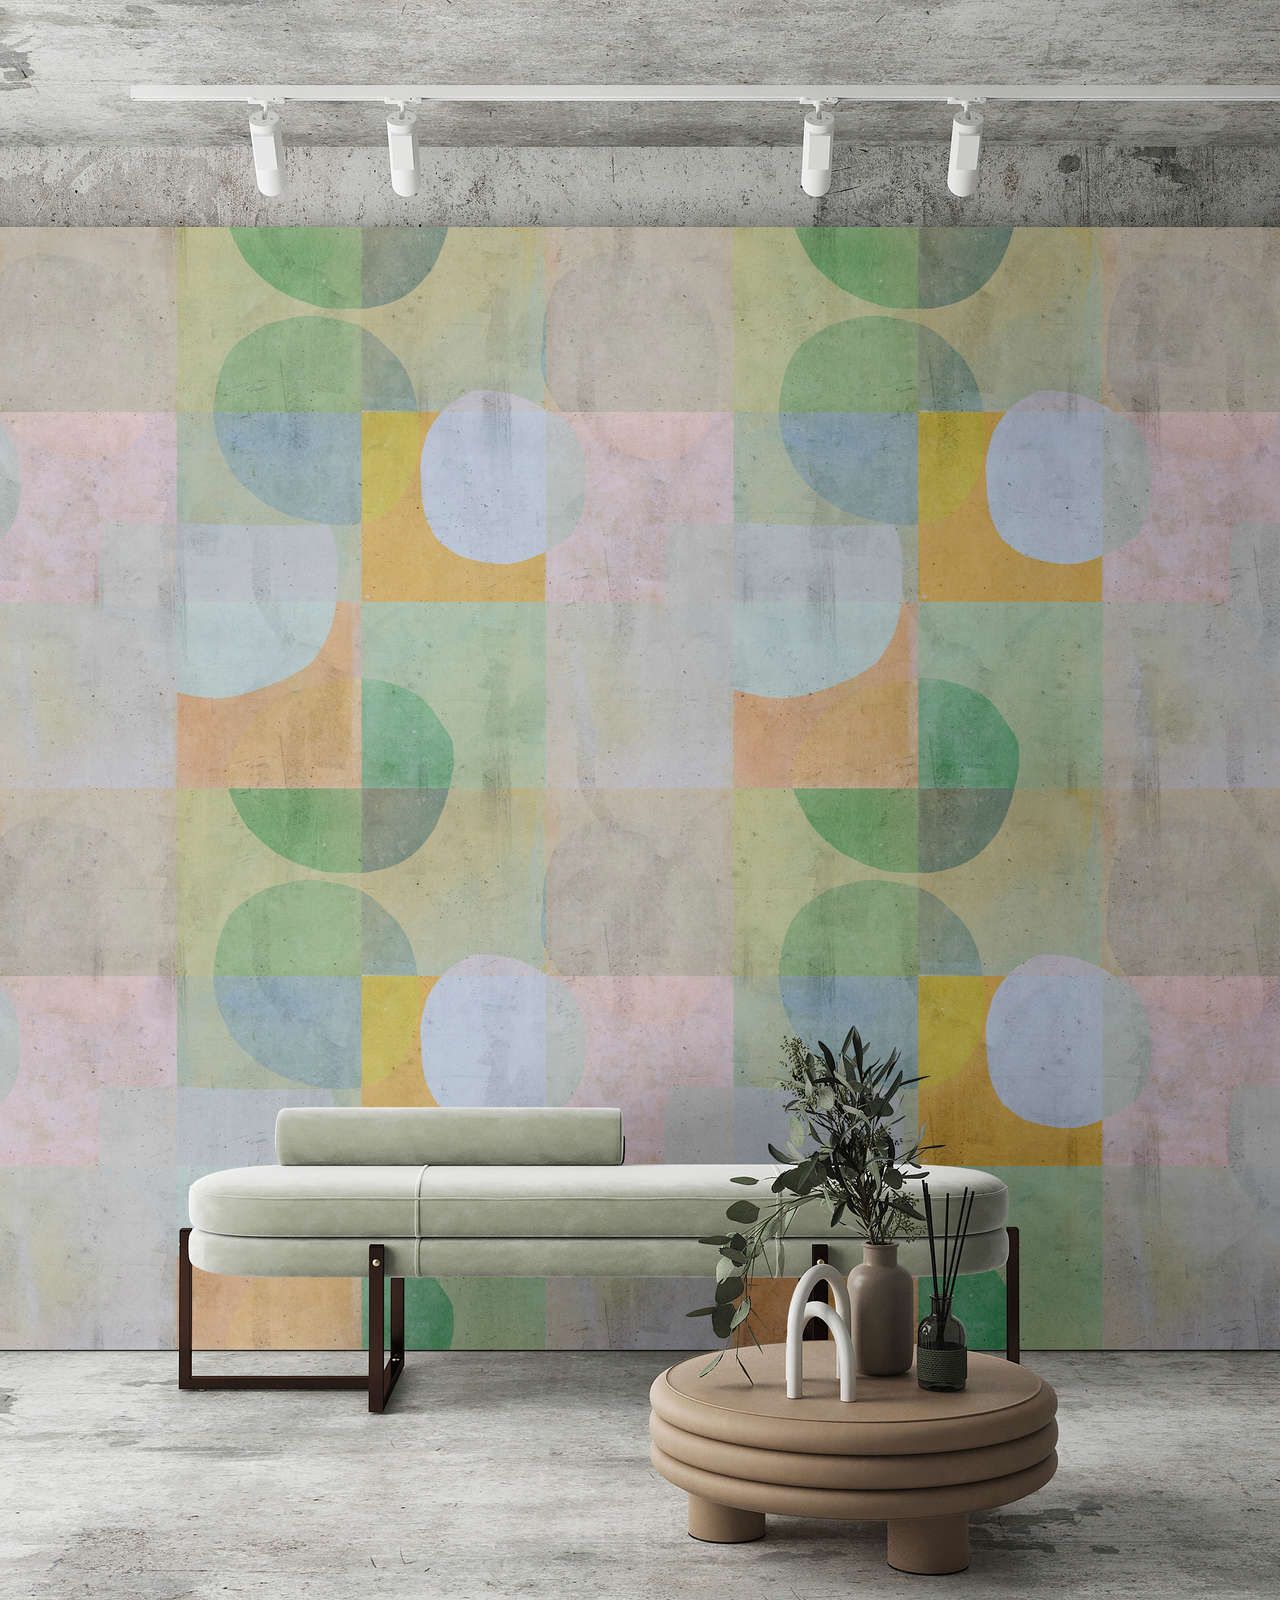             Photo wallpaper »elija 1« - retro pattern in pale colours with concrete look - green, blue, pink | Smooth, slightly pearlescent non-woven fabric
        